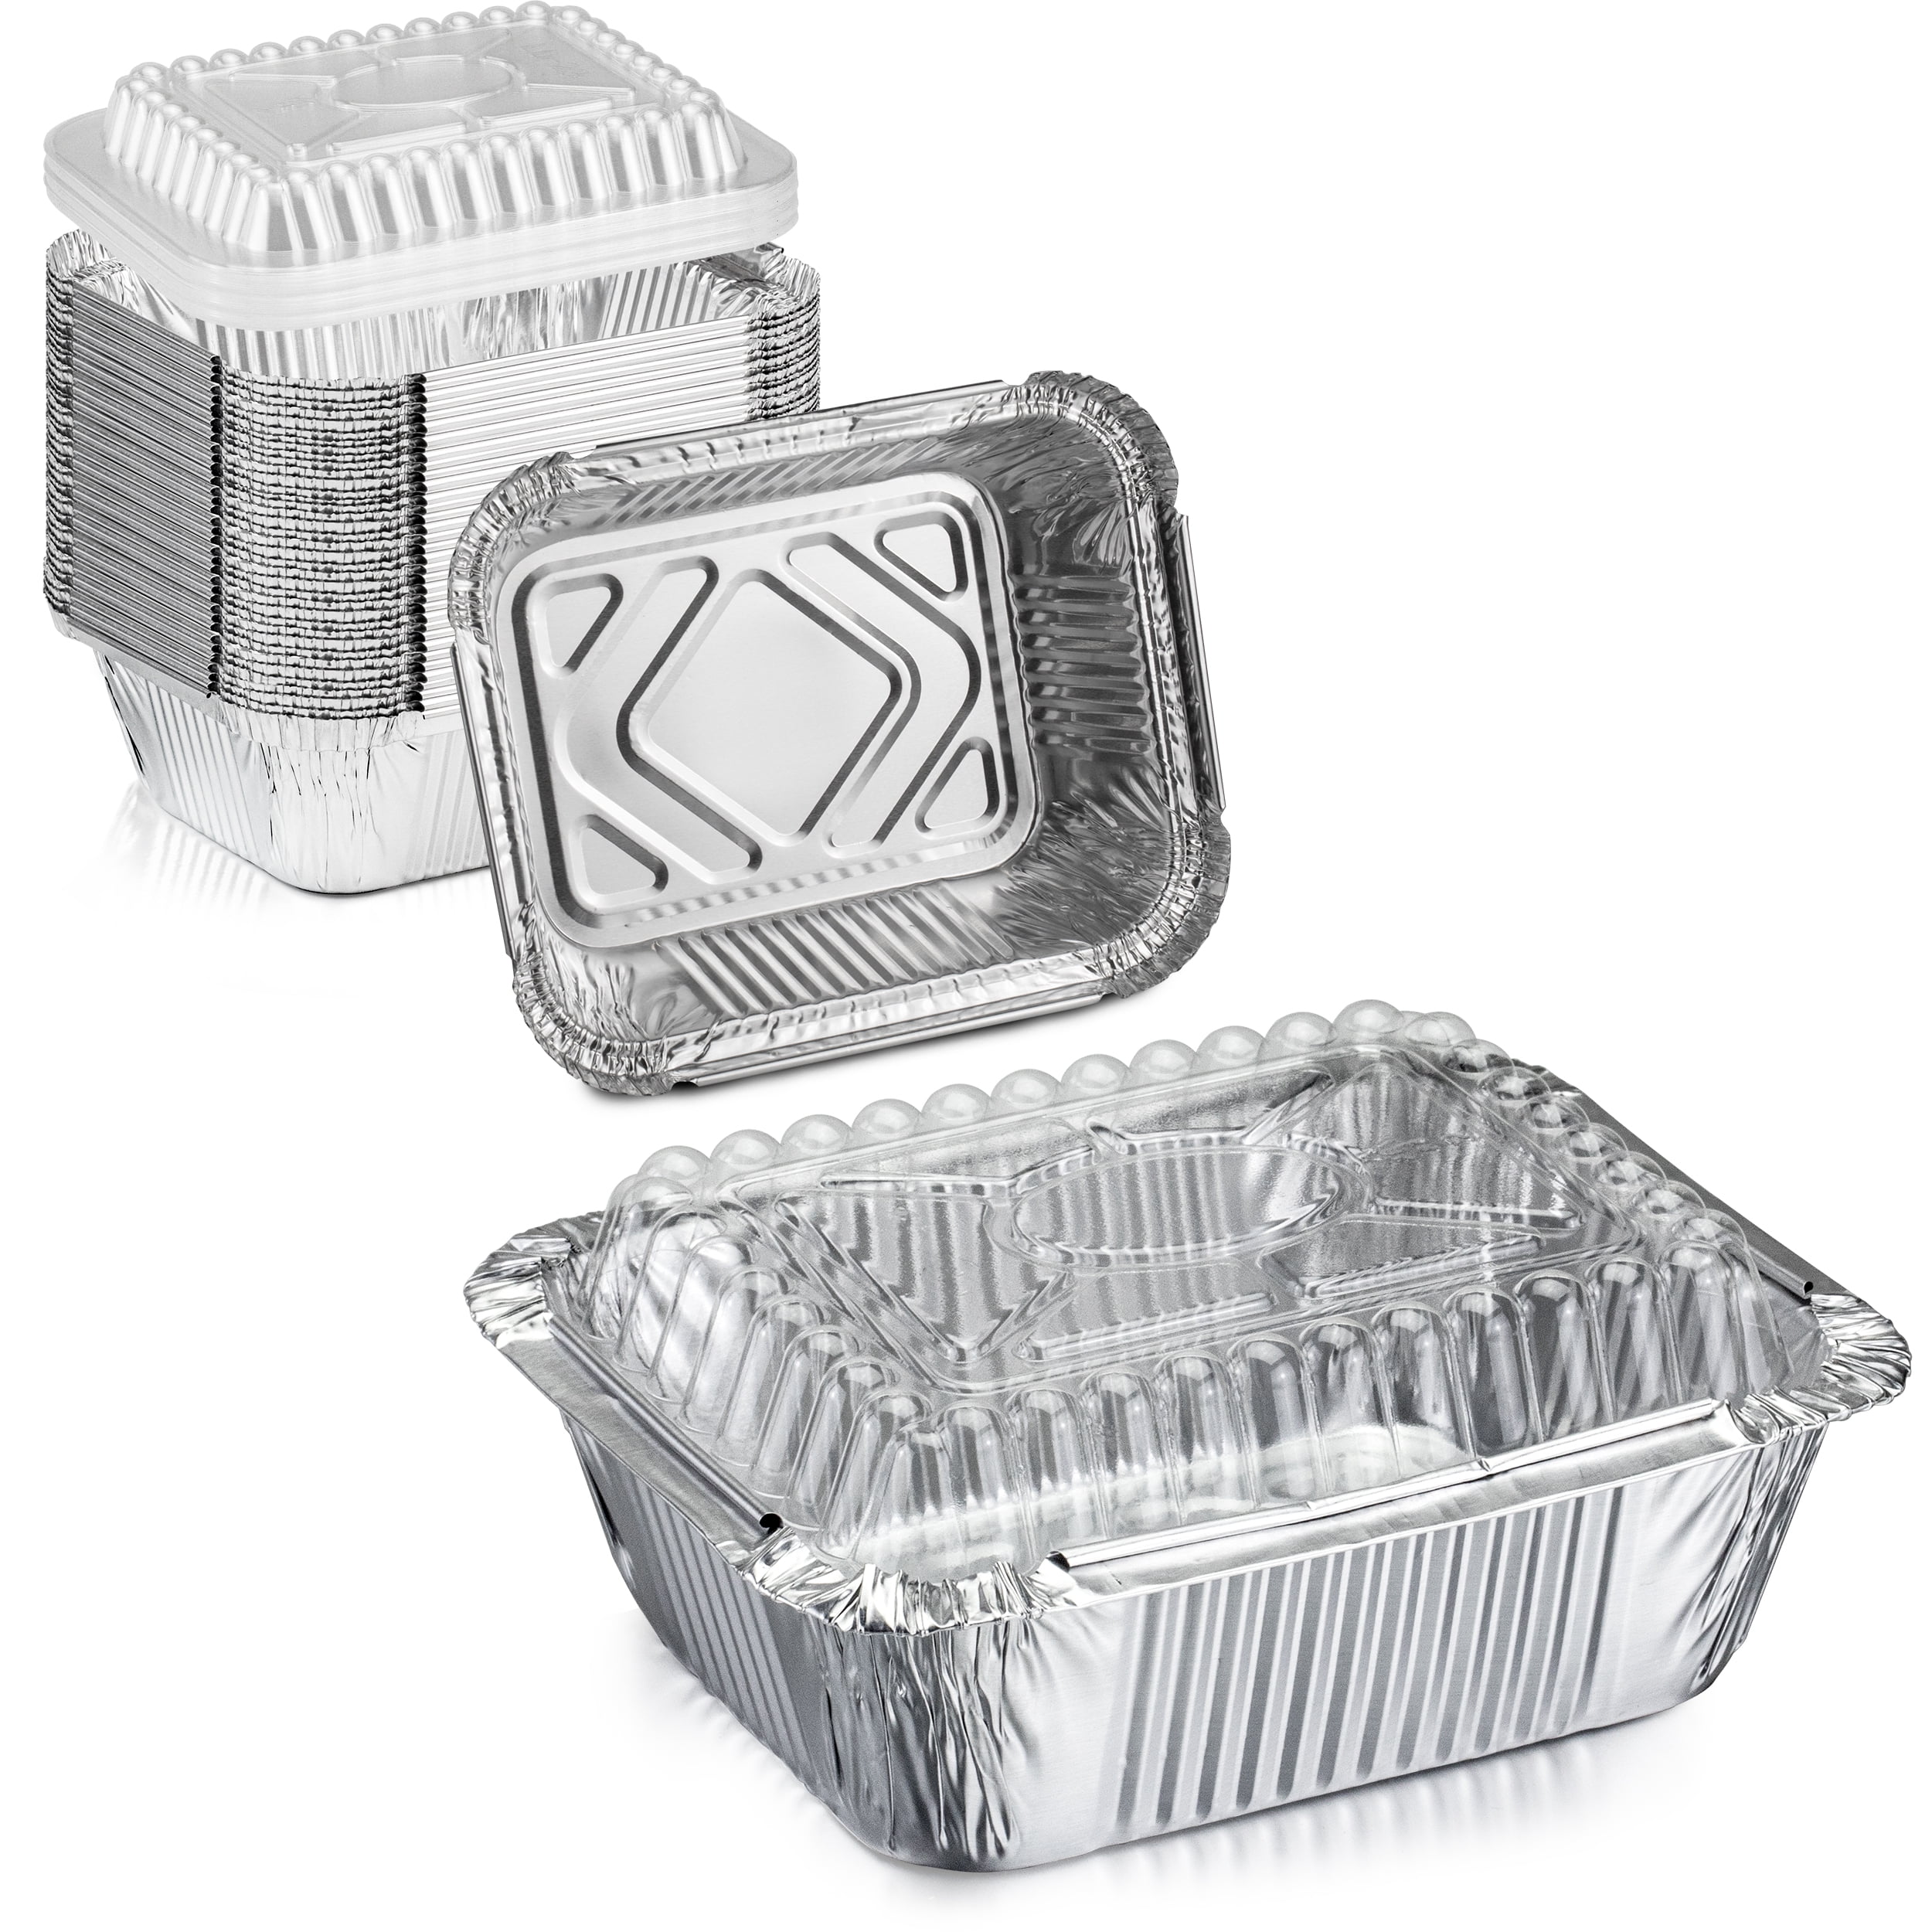 10pack 20pack 50 Pack Disposable Aluminum Foil Containers Half Size 9X13  Aluminium Foil Pans Baking Tray with Lid - China Half Size Aluminum Tray,  Aluminum Tray with Lid